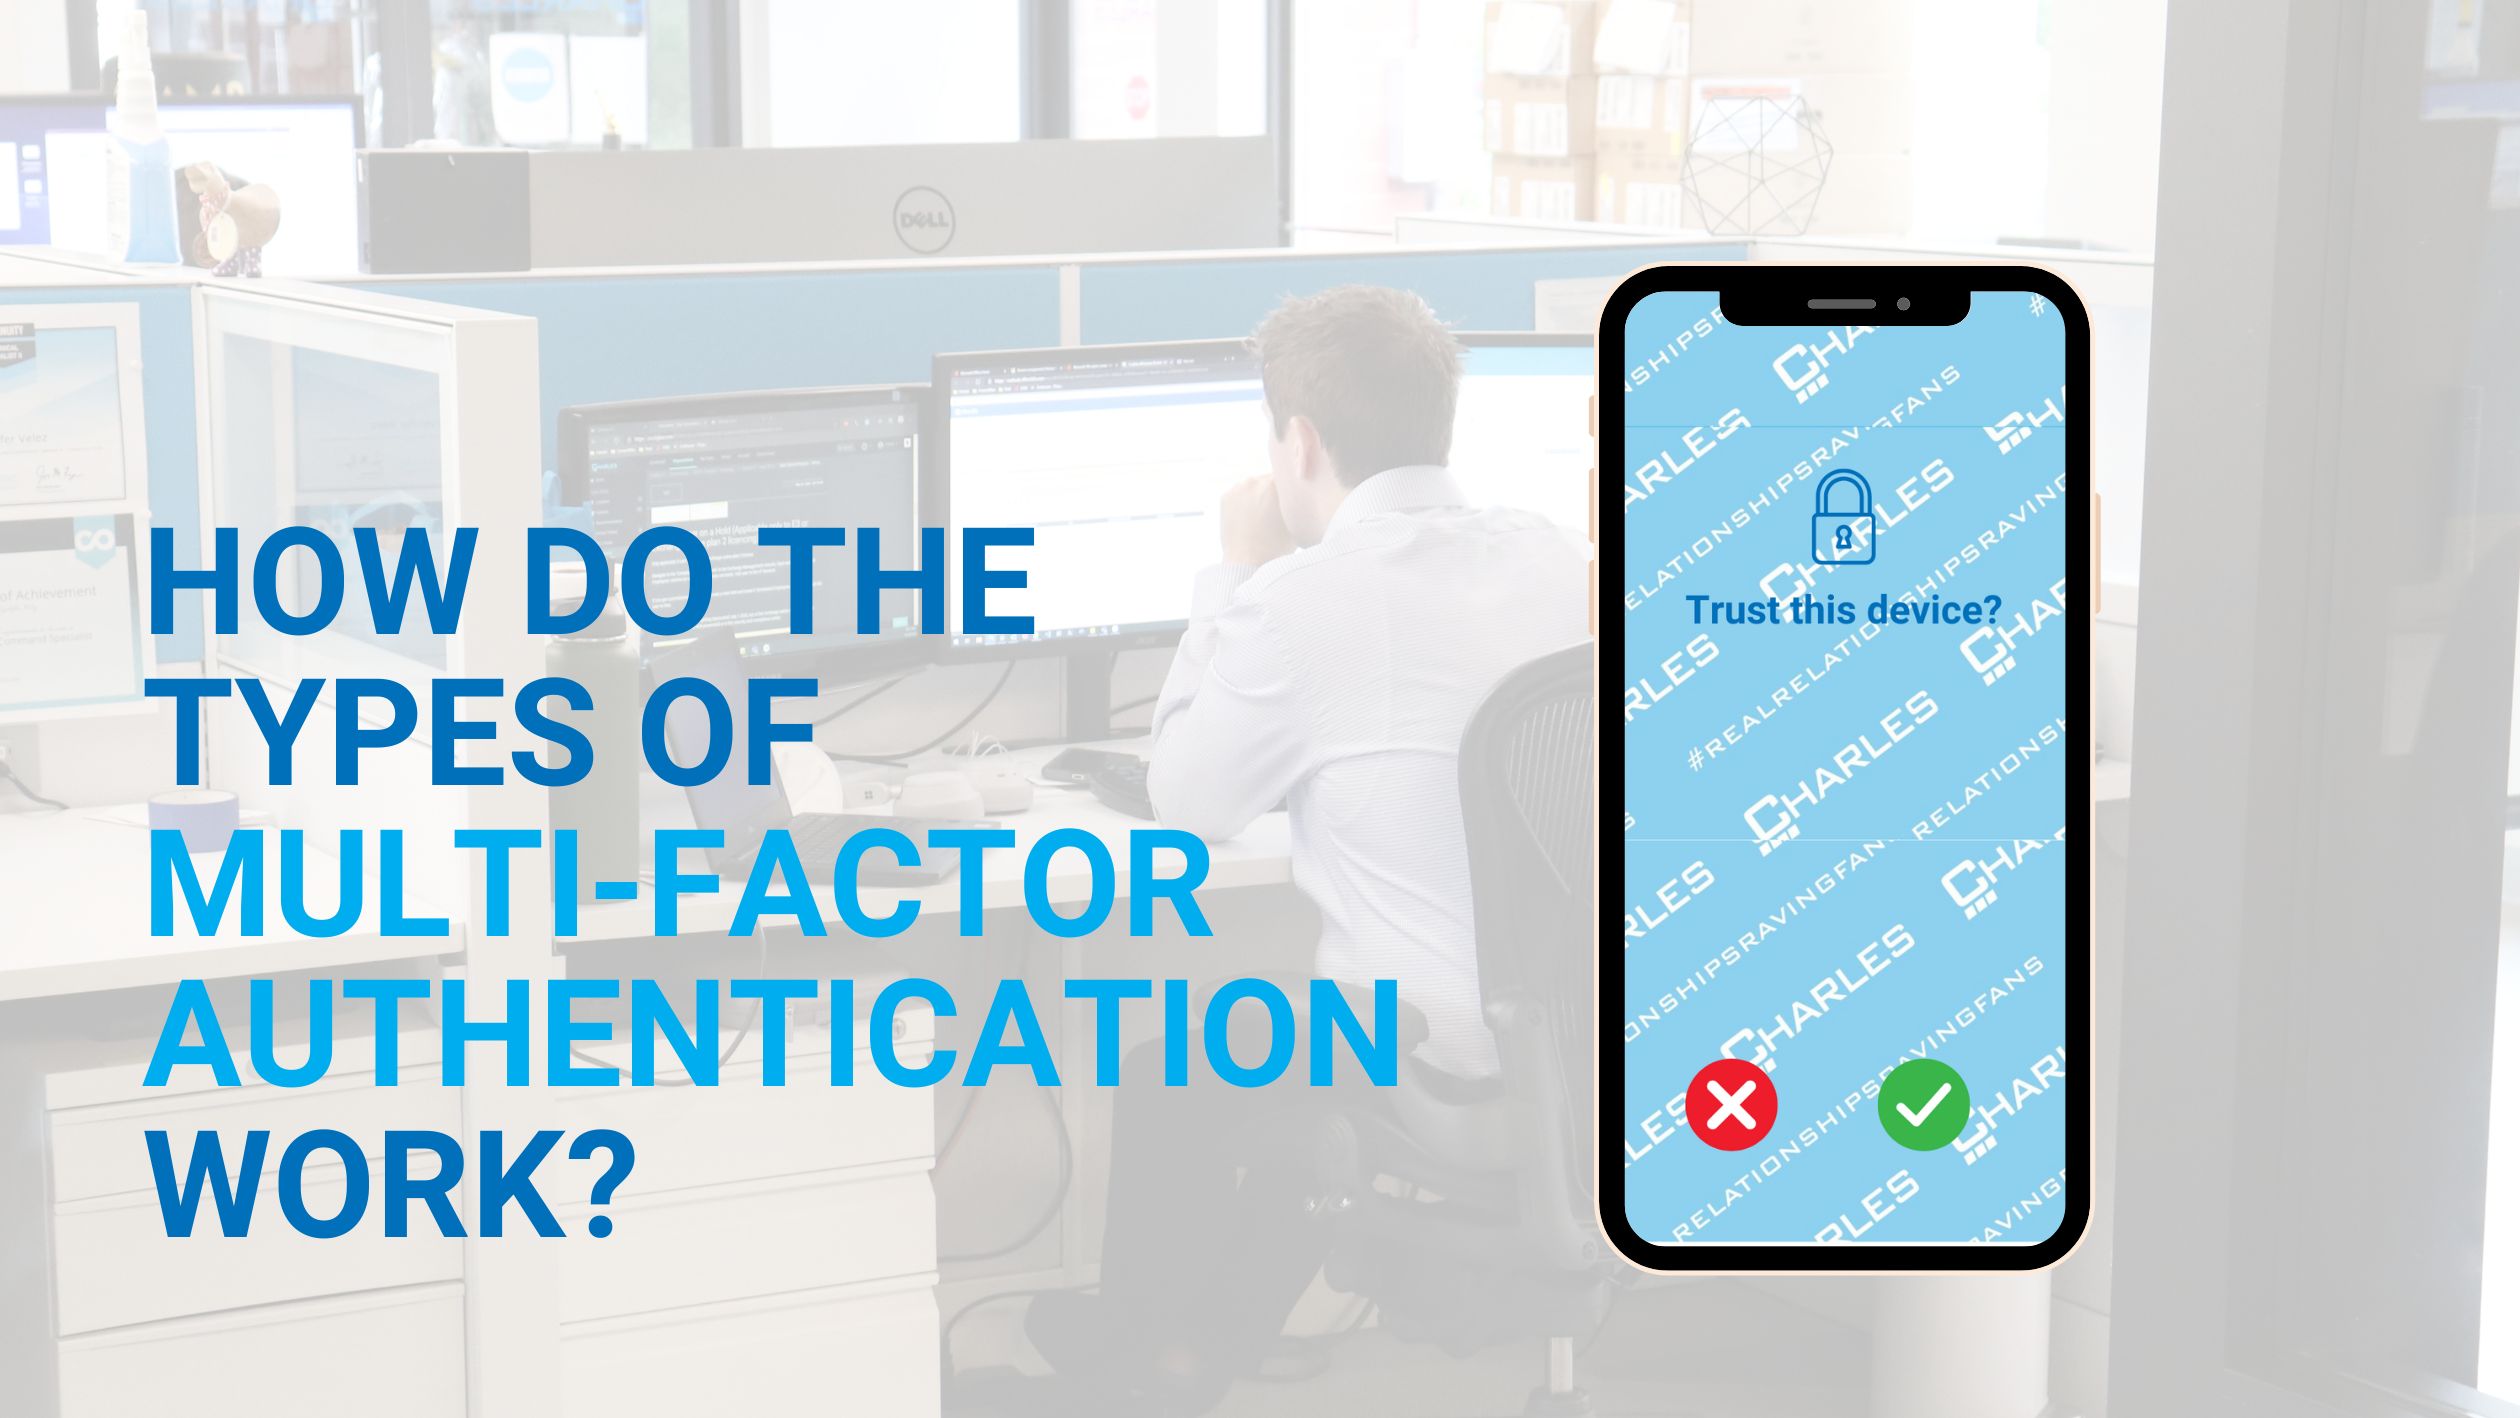 How Do the Types of Multi-Factor Authentication Work?